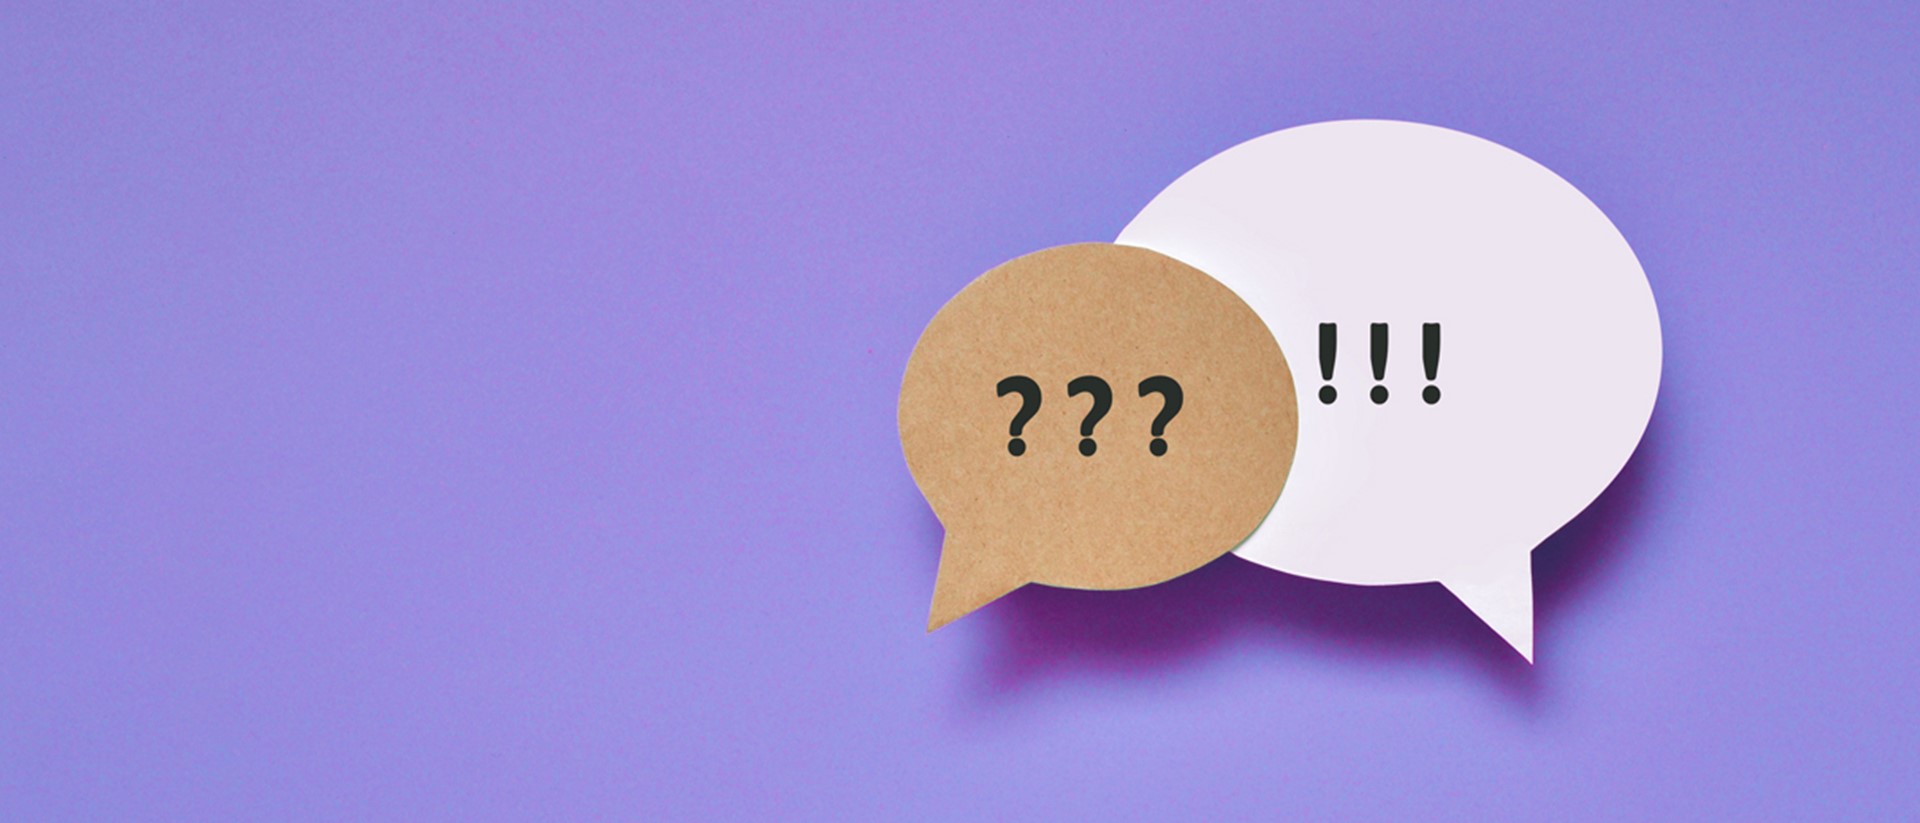 Image of two speech bubbles against a purple background